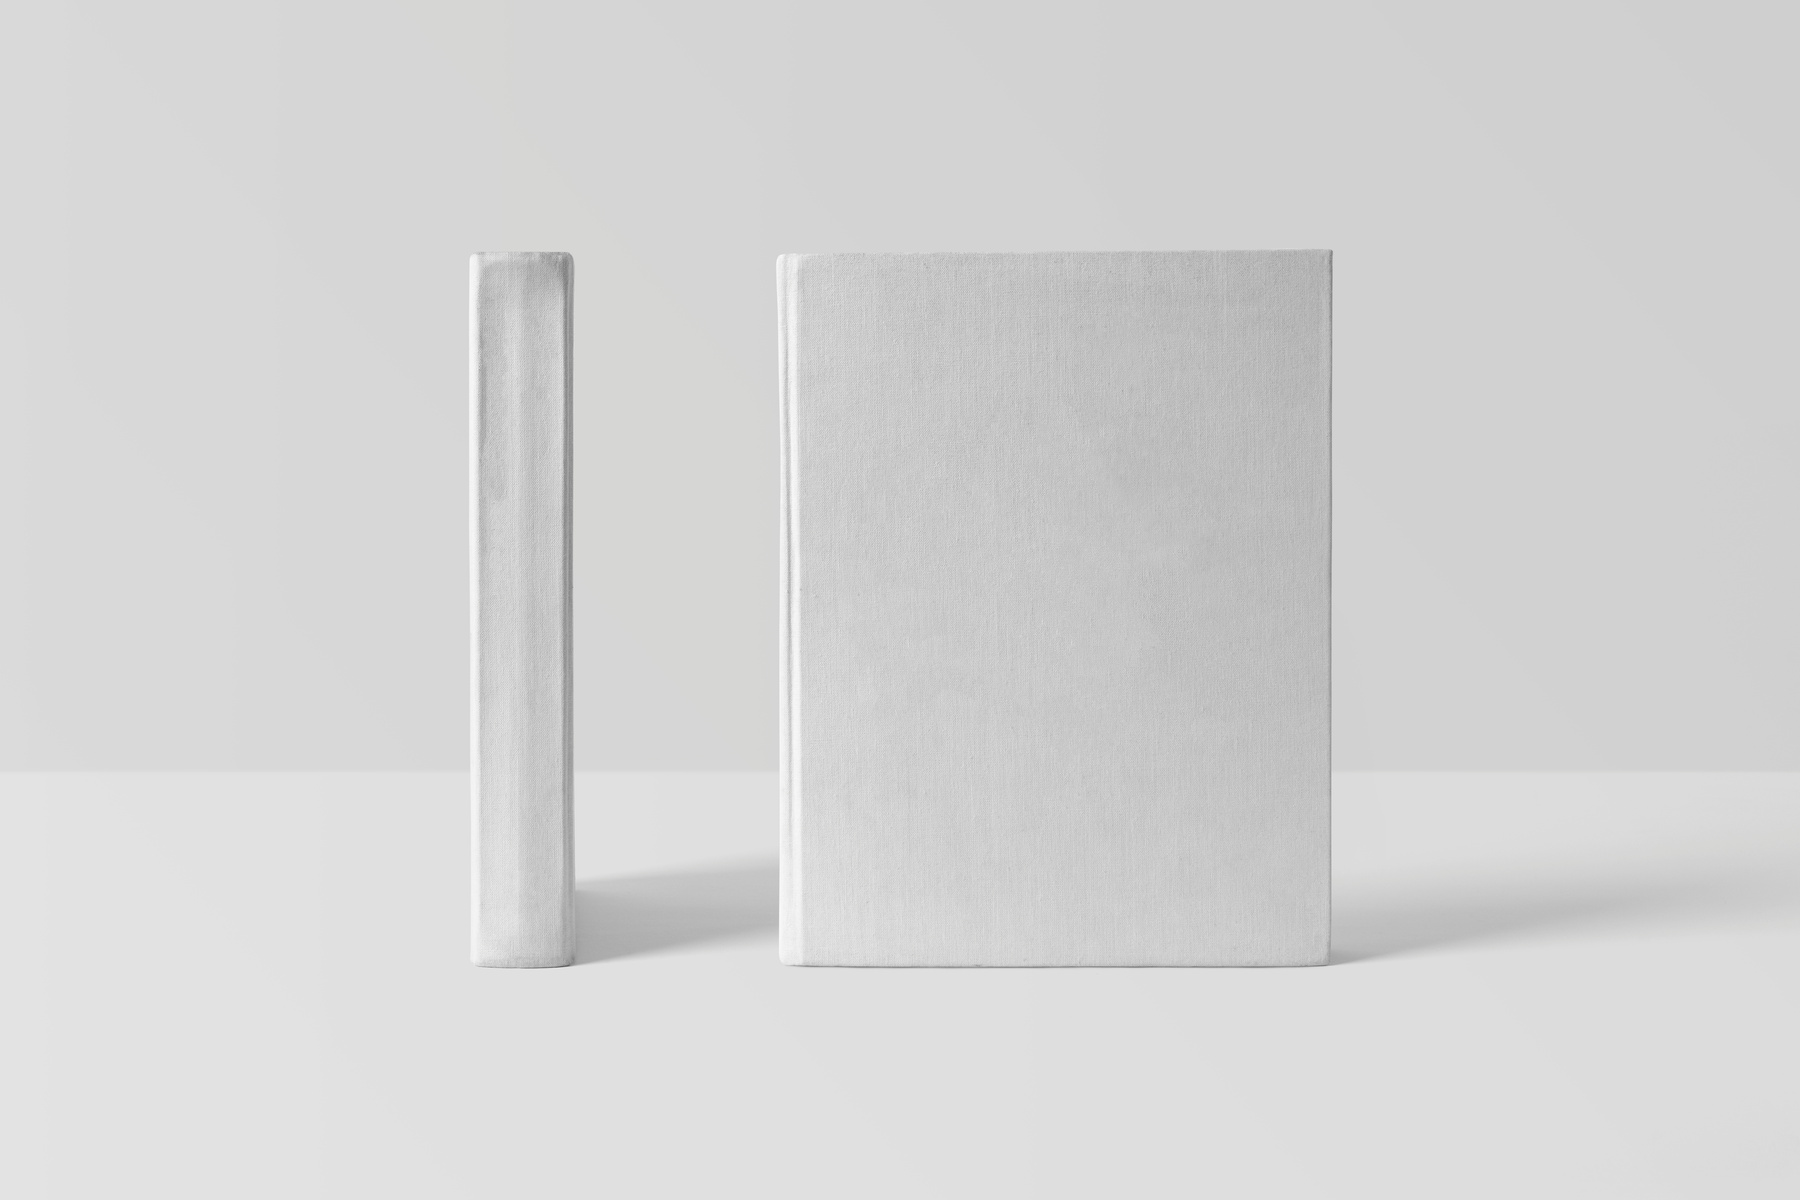 Blank Books on a White Background